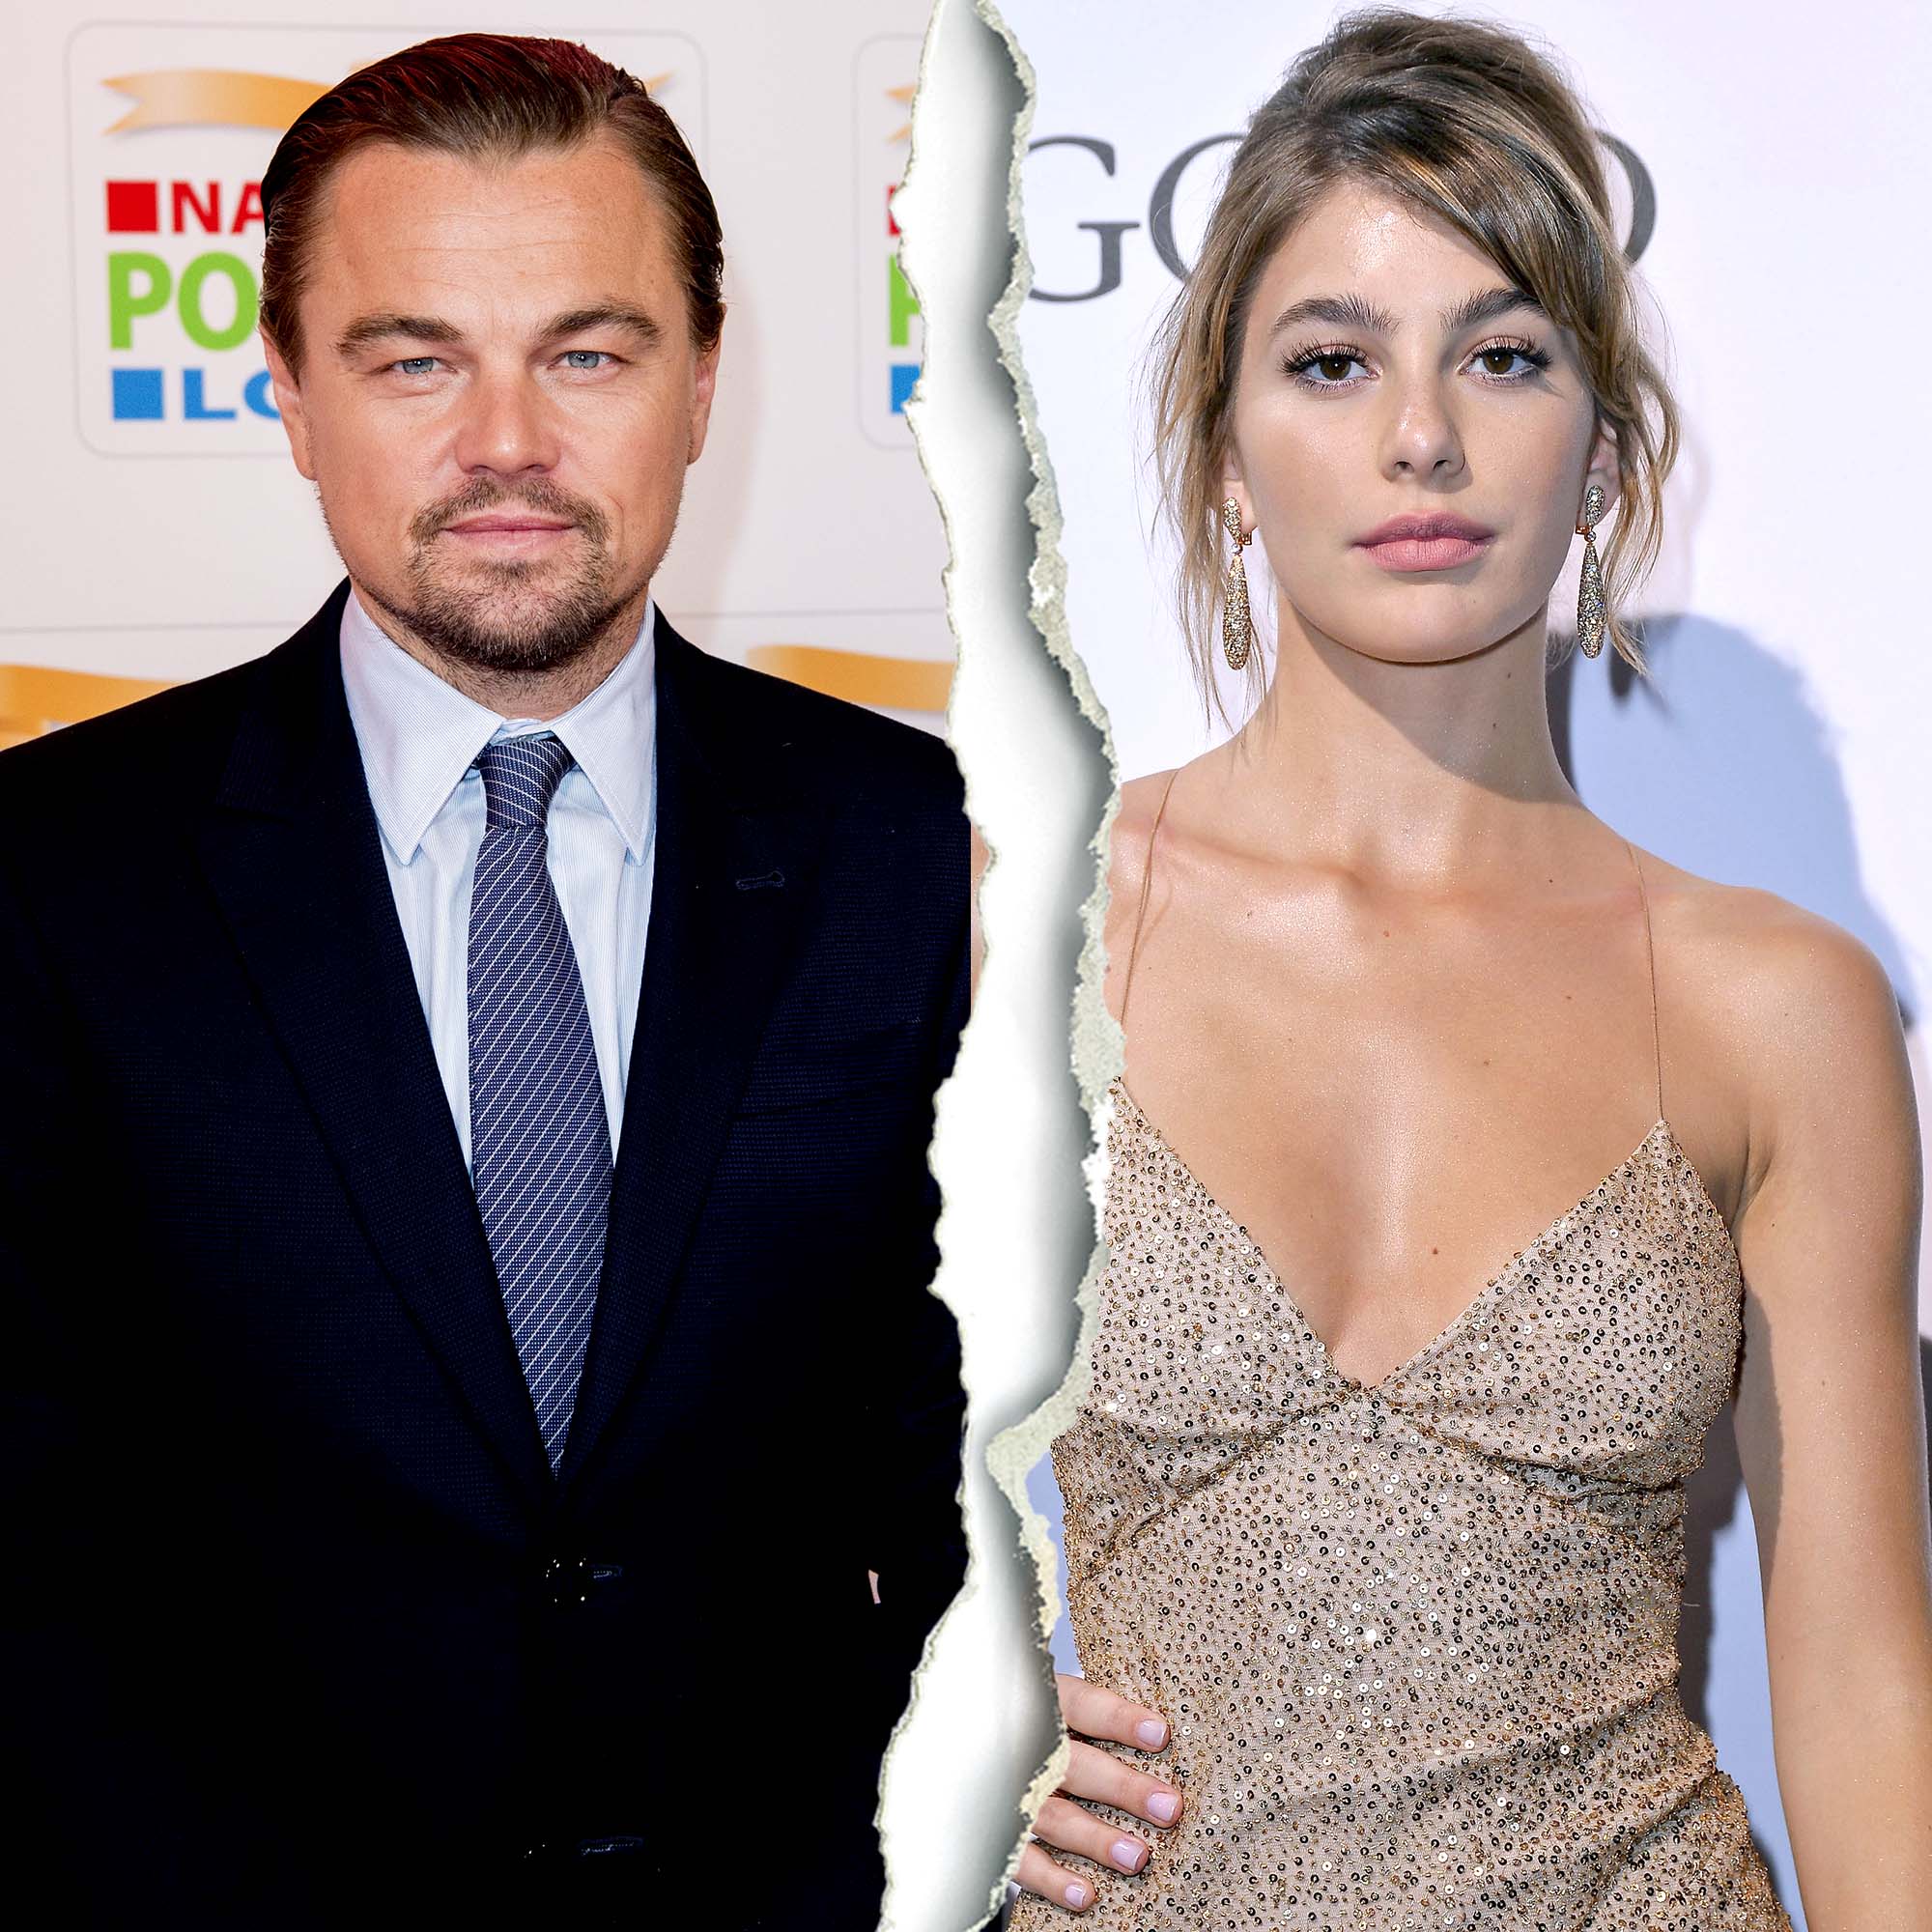 Leo’s Breakup Announcement Goes Viral